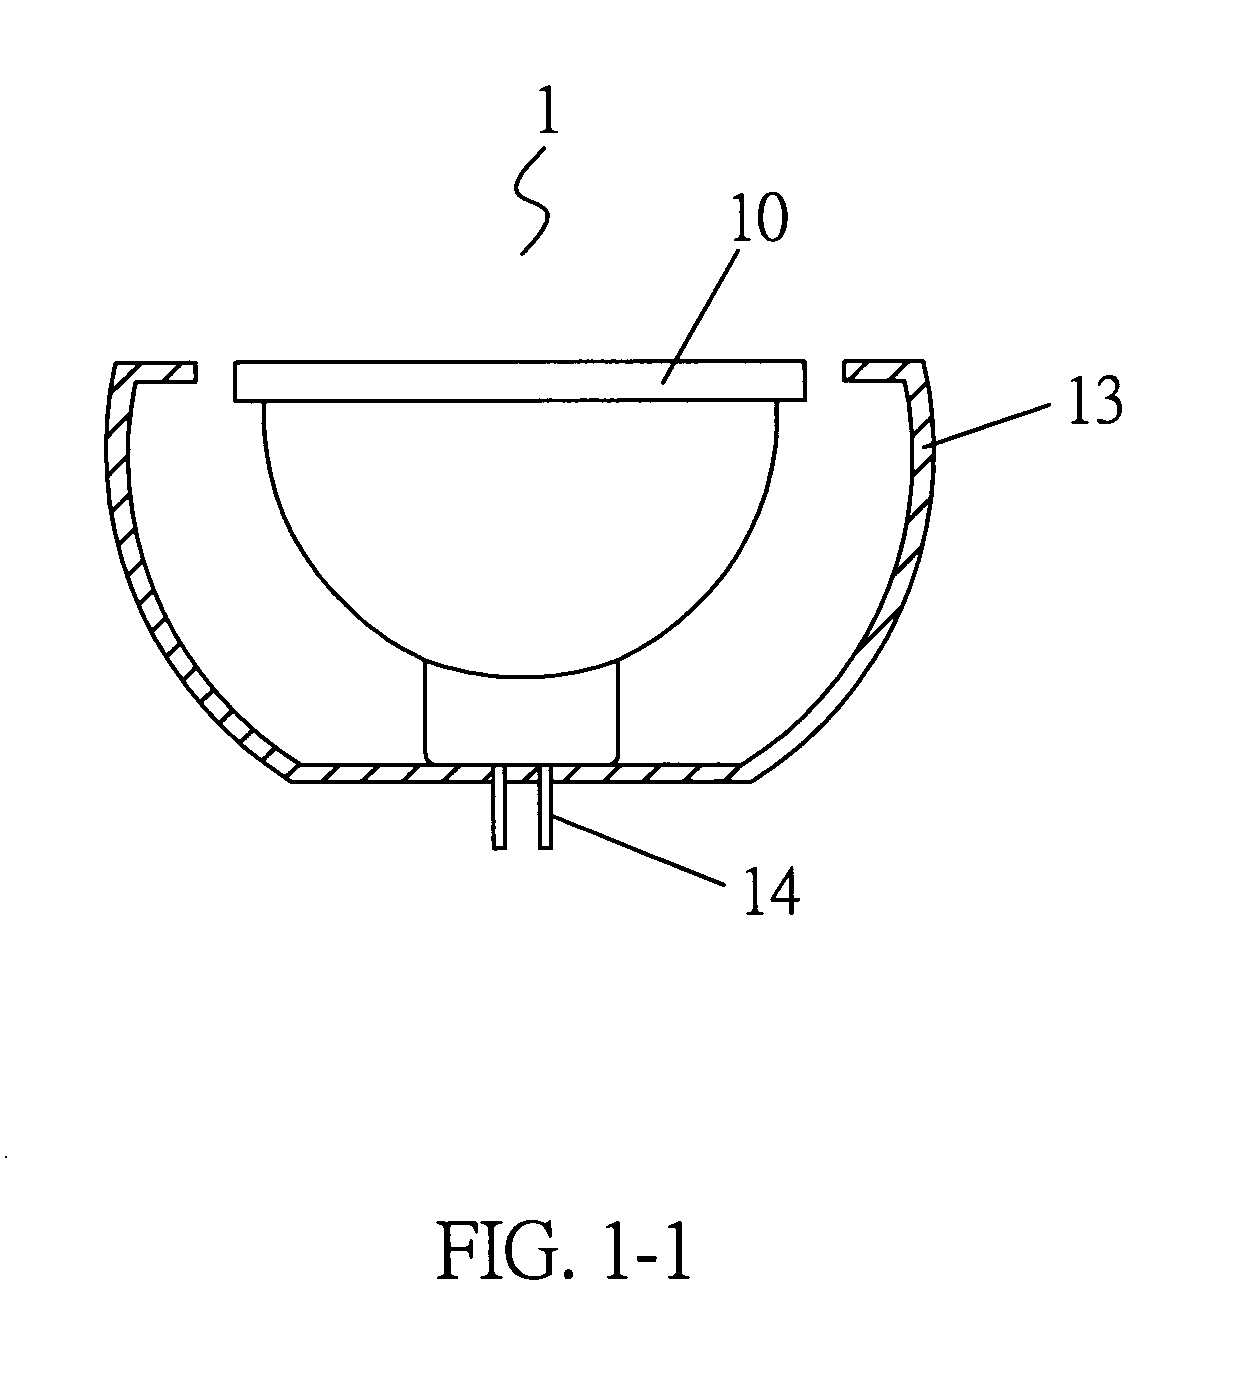 Heat conductor assembly of light source